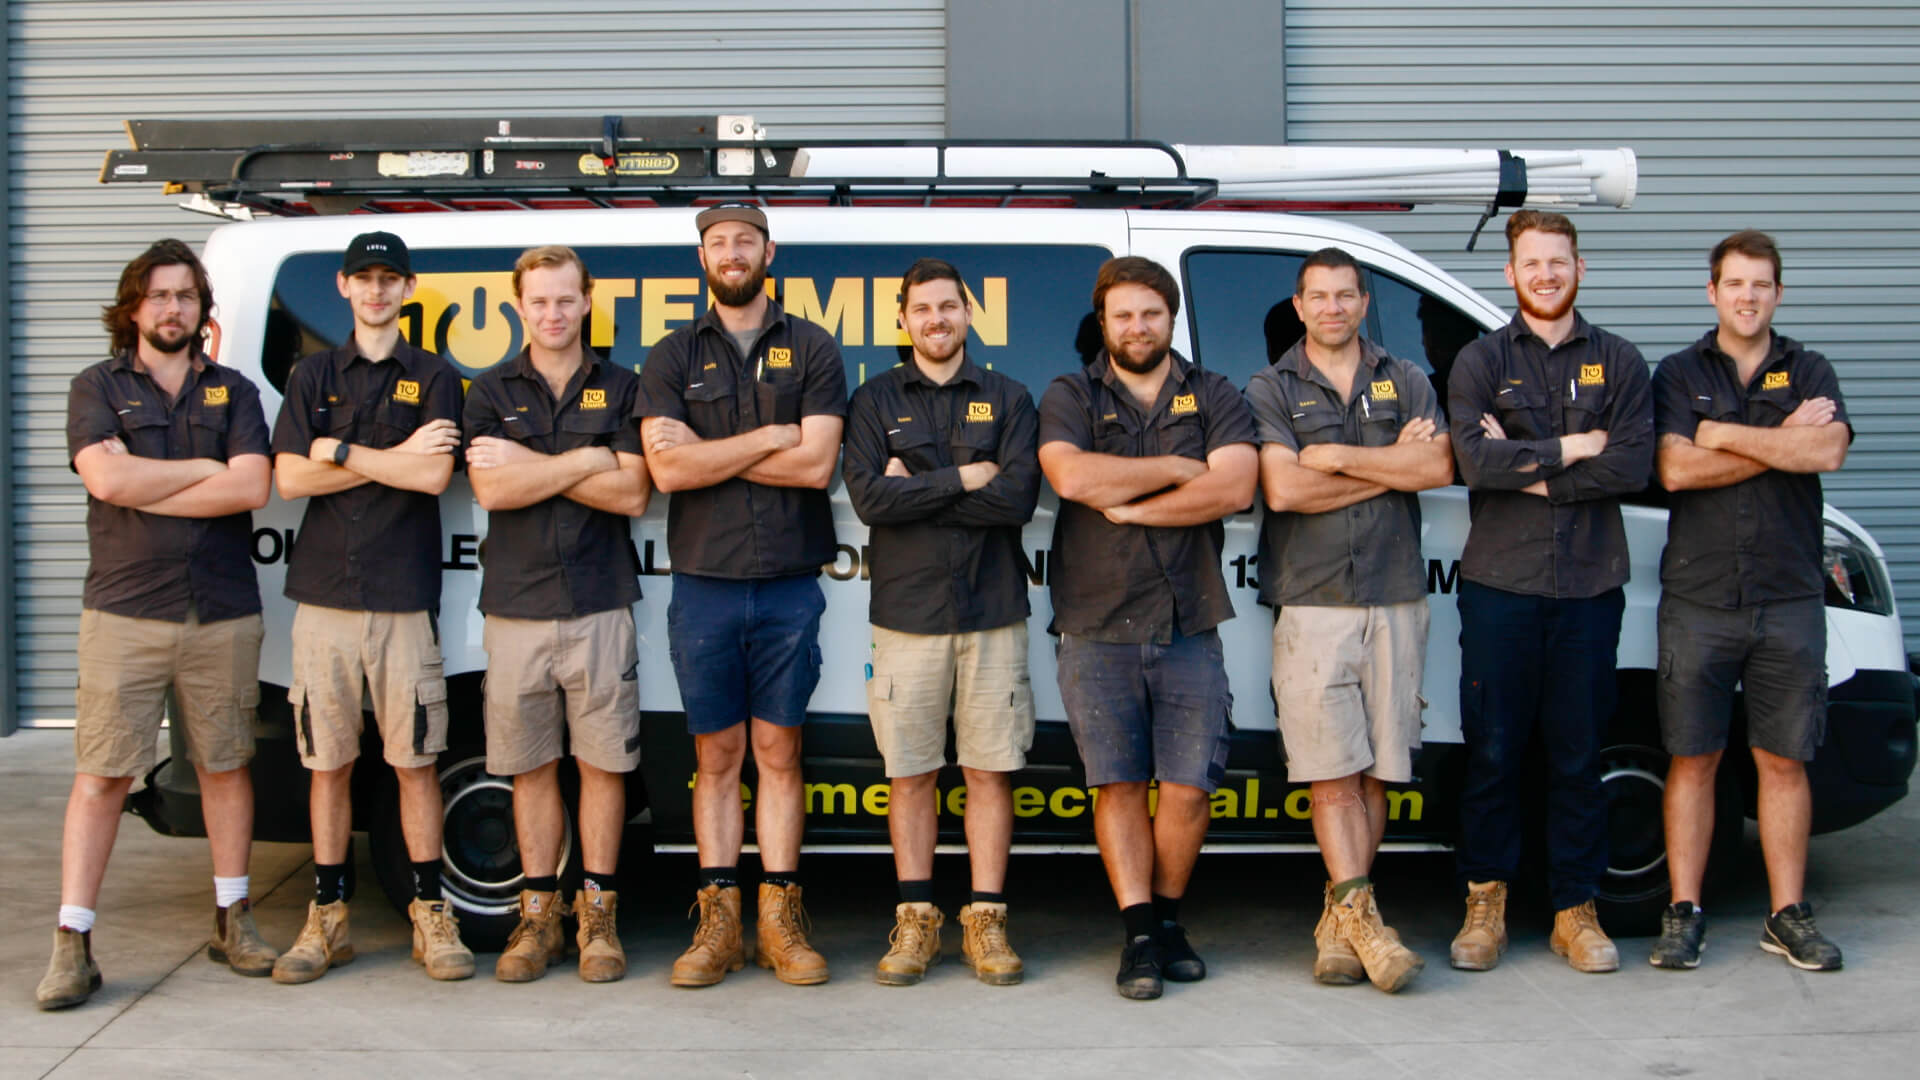 The team of Nambour electricians standing in front of the working van.